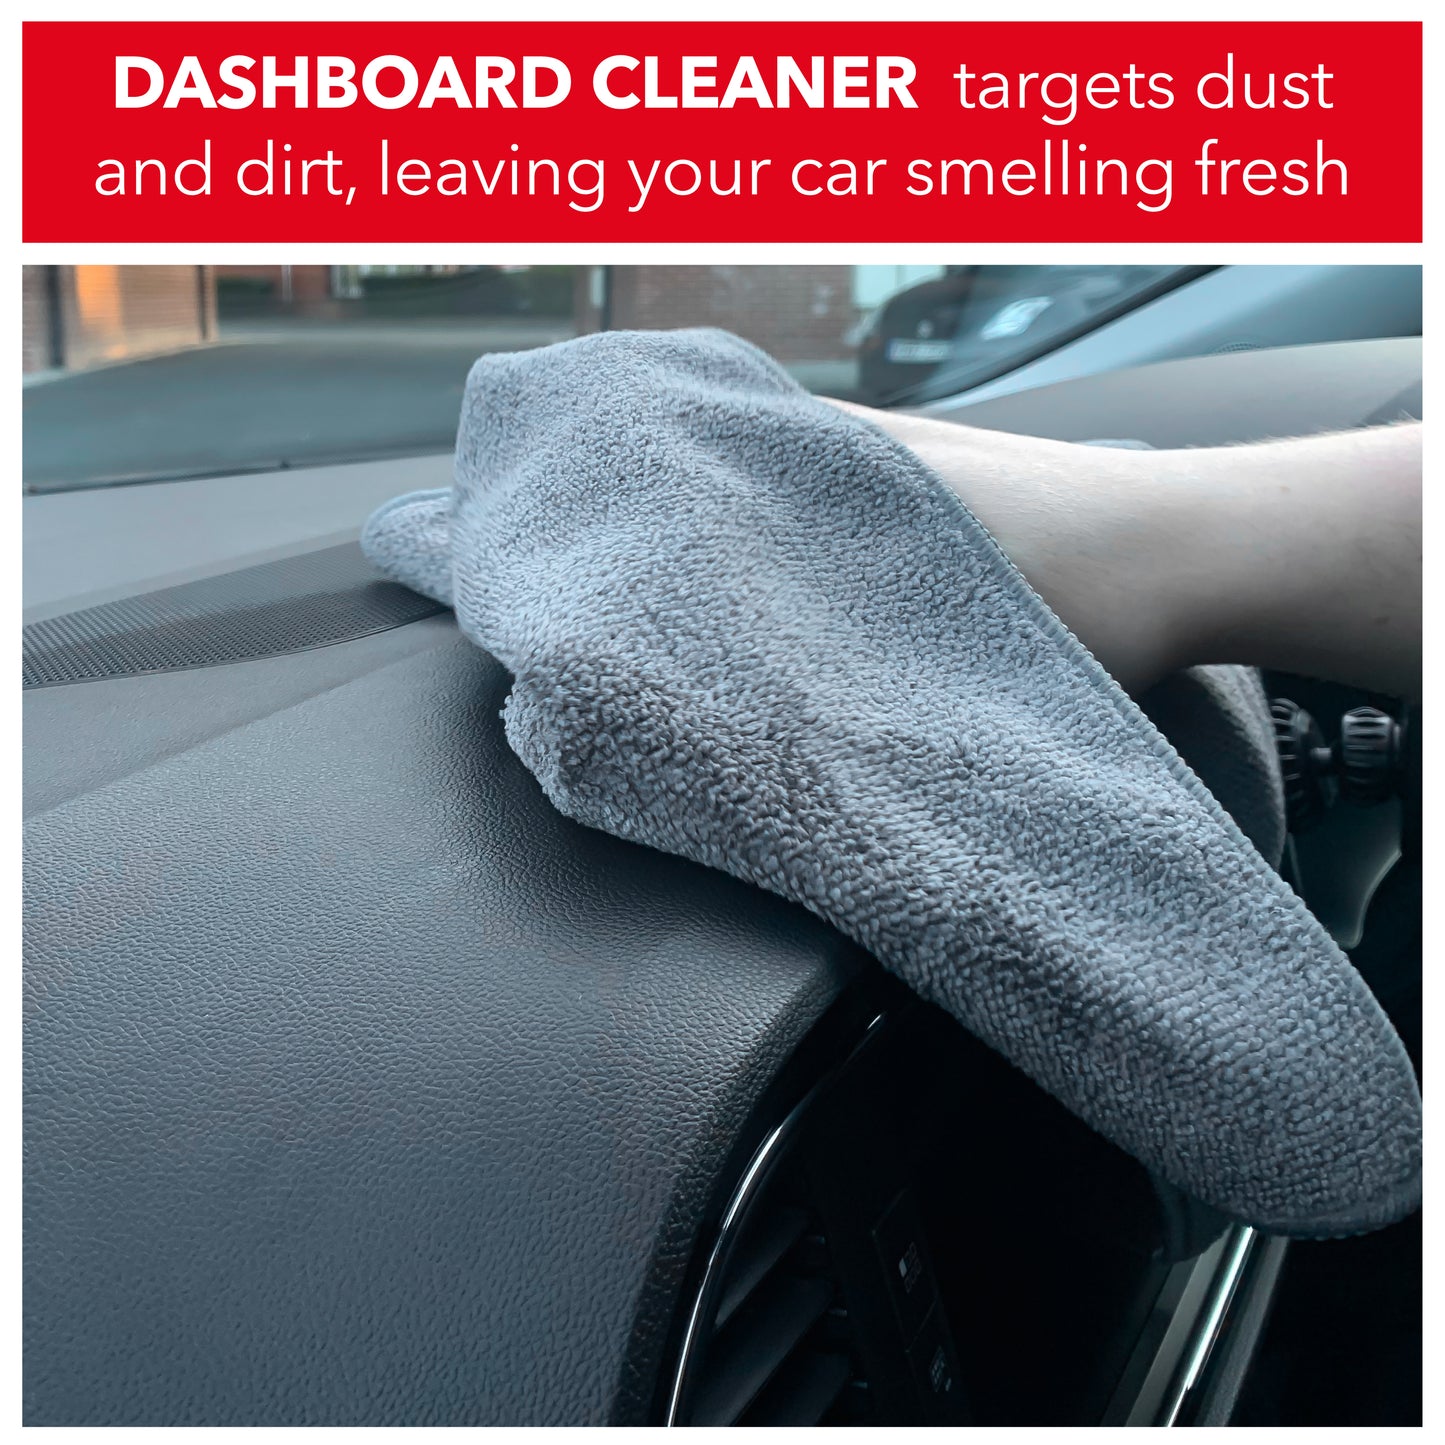 dashboard cleaner targets dust and dirt, leaving your car smelling fresh